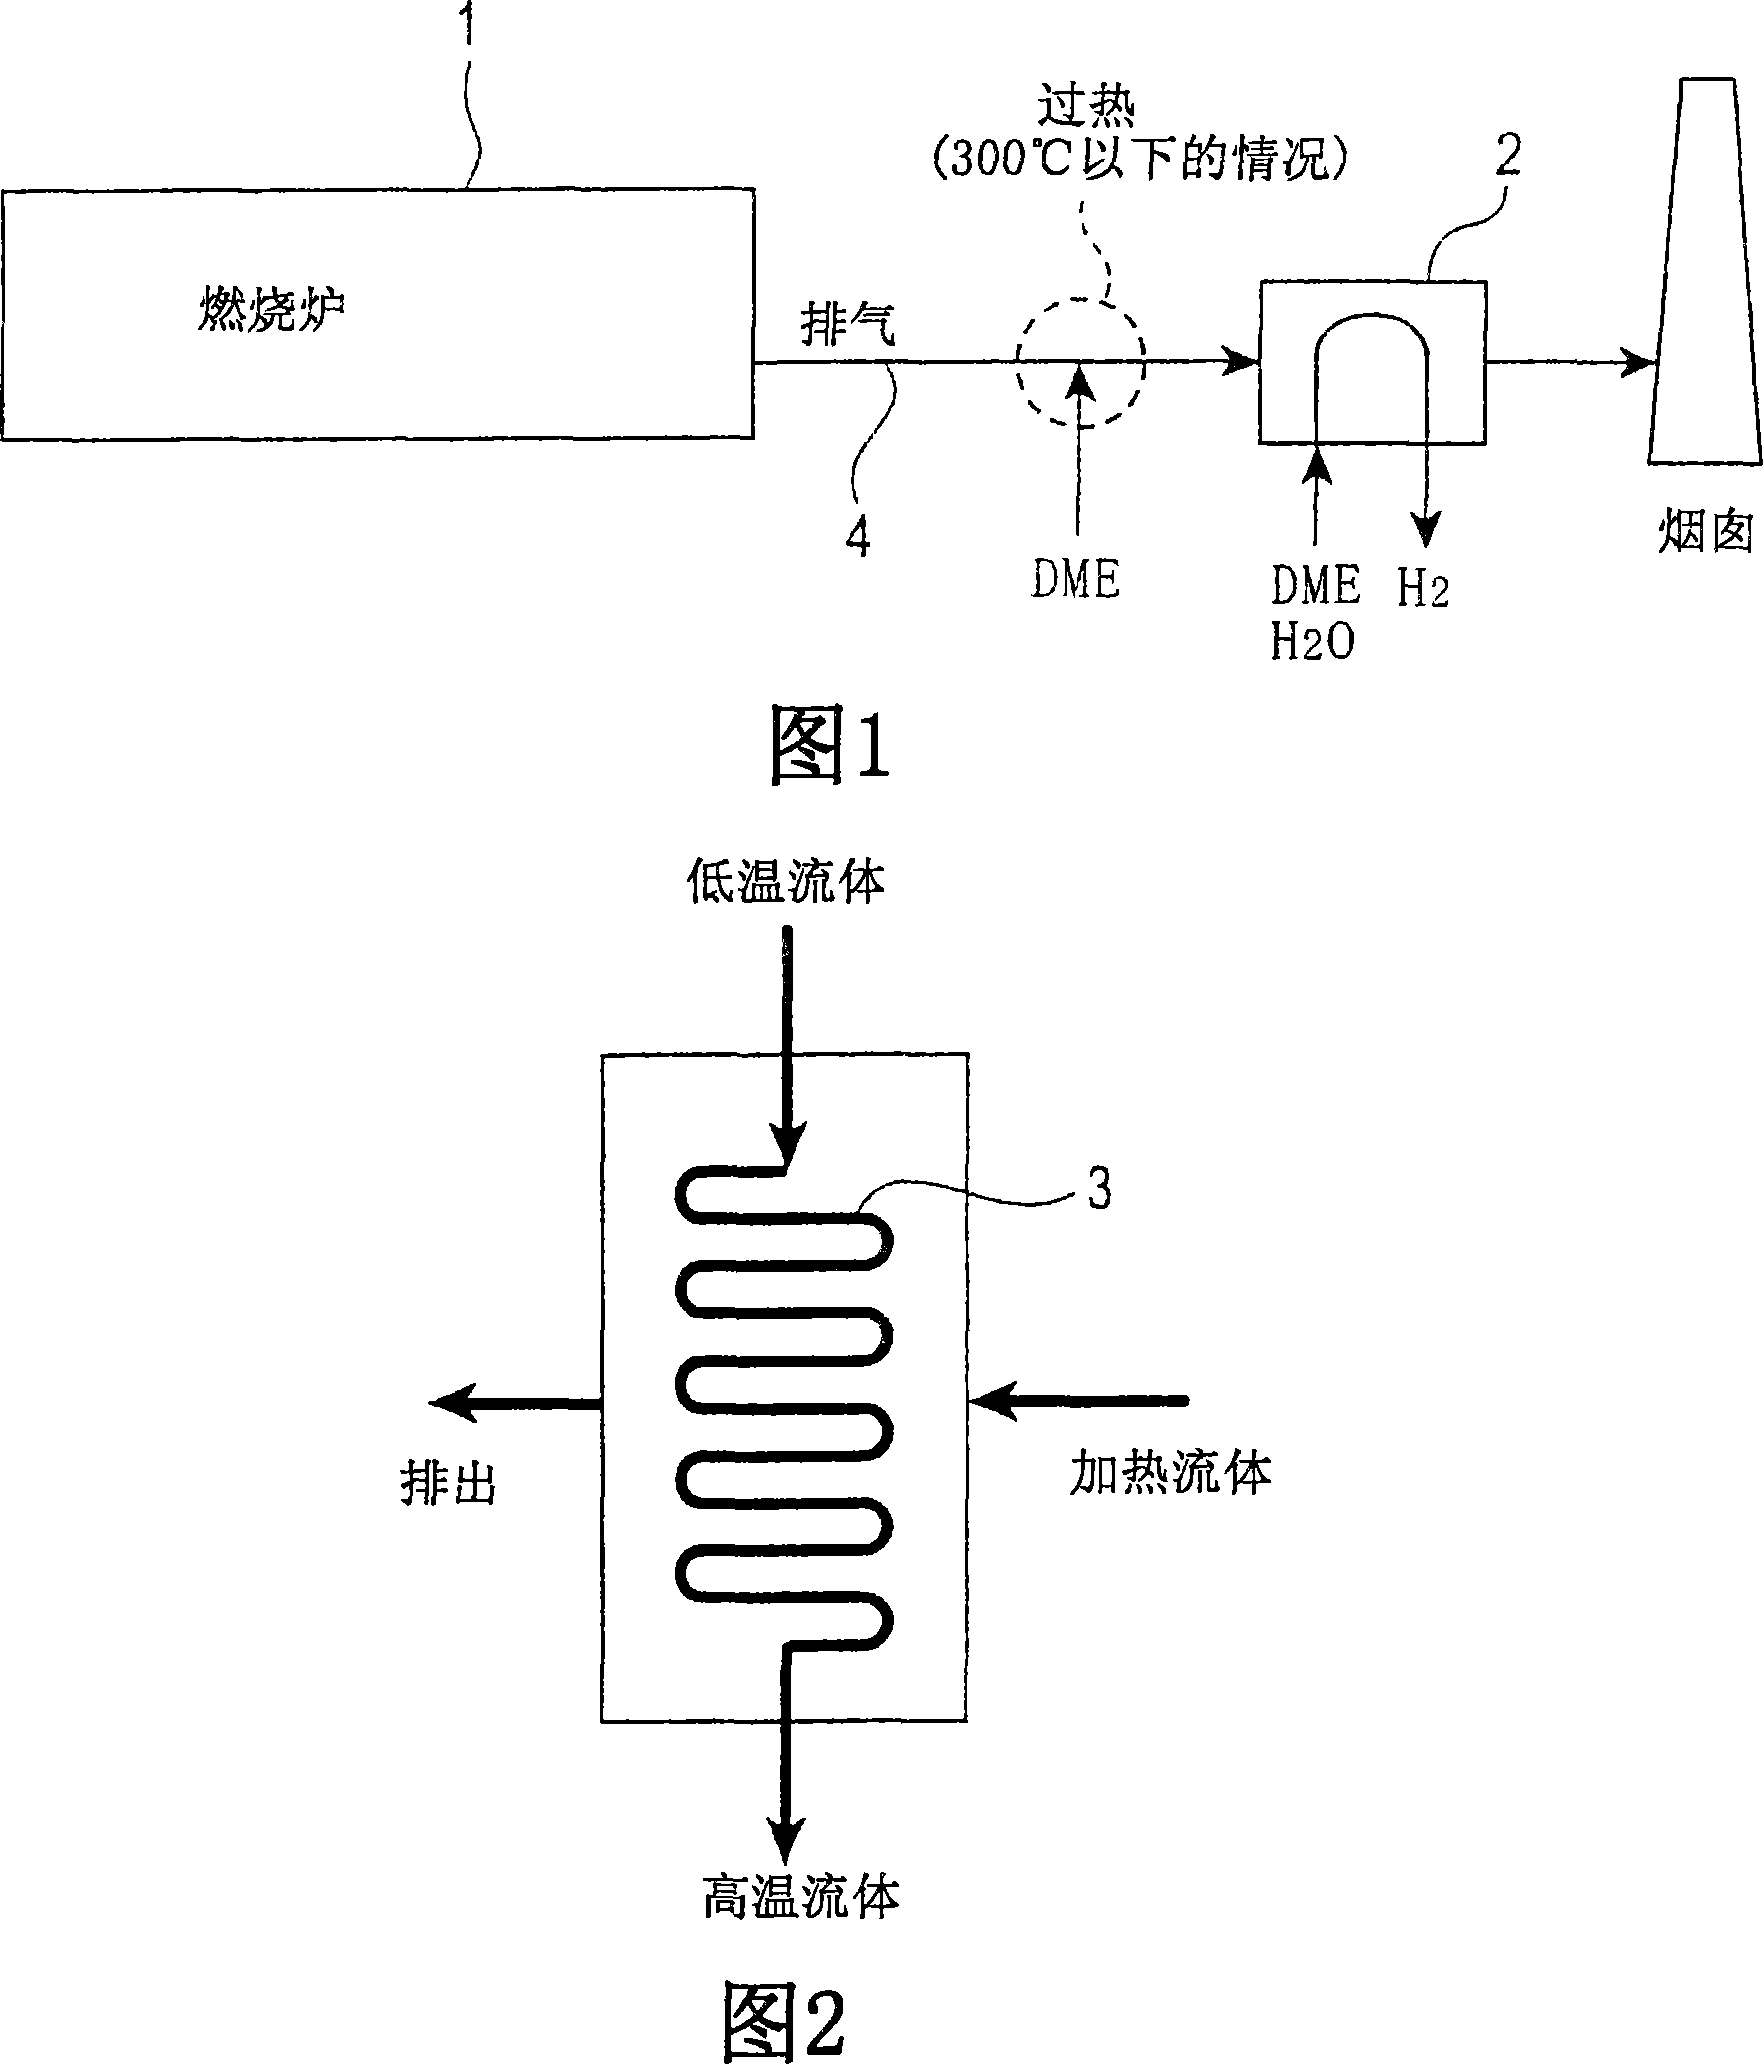 Waste heat recovery apparatus, waste heat recovery system, and method of recovering waste heat